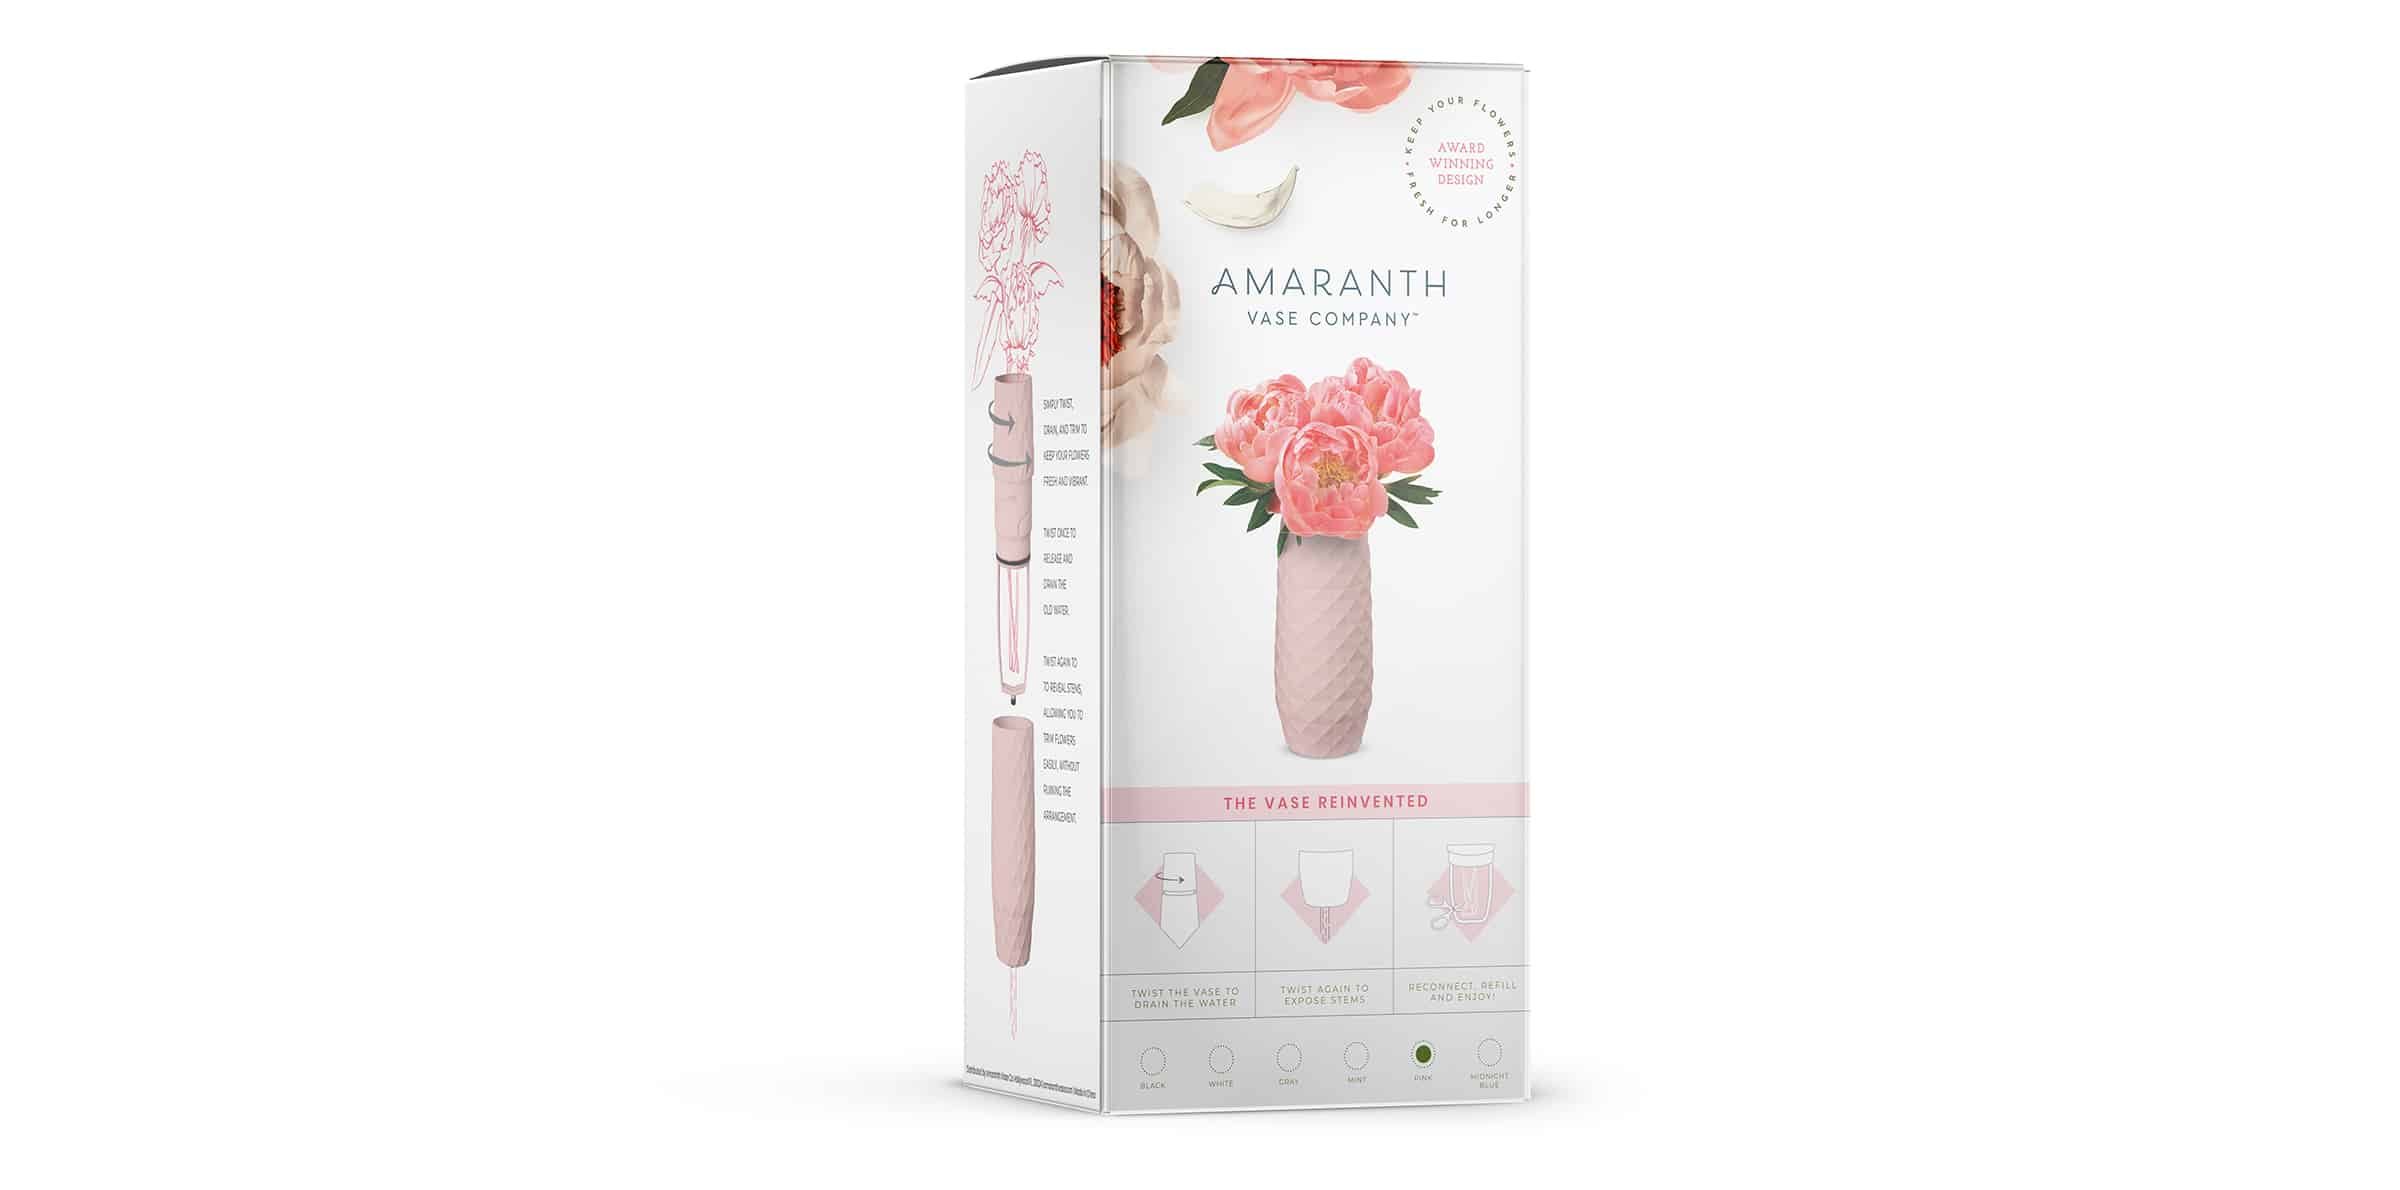 Amaranth Vase new retail packaging showing pink vase and easy-to-use illustrated instructions.